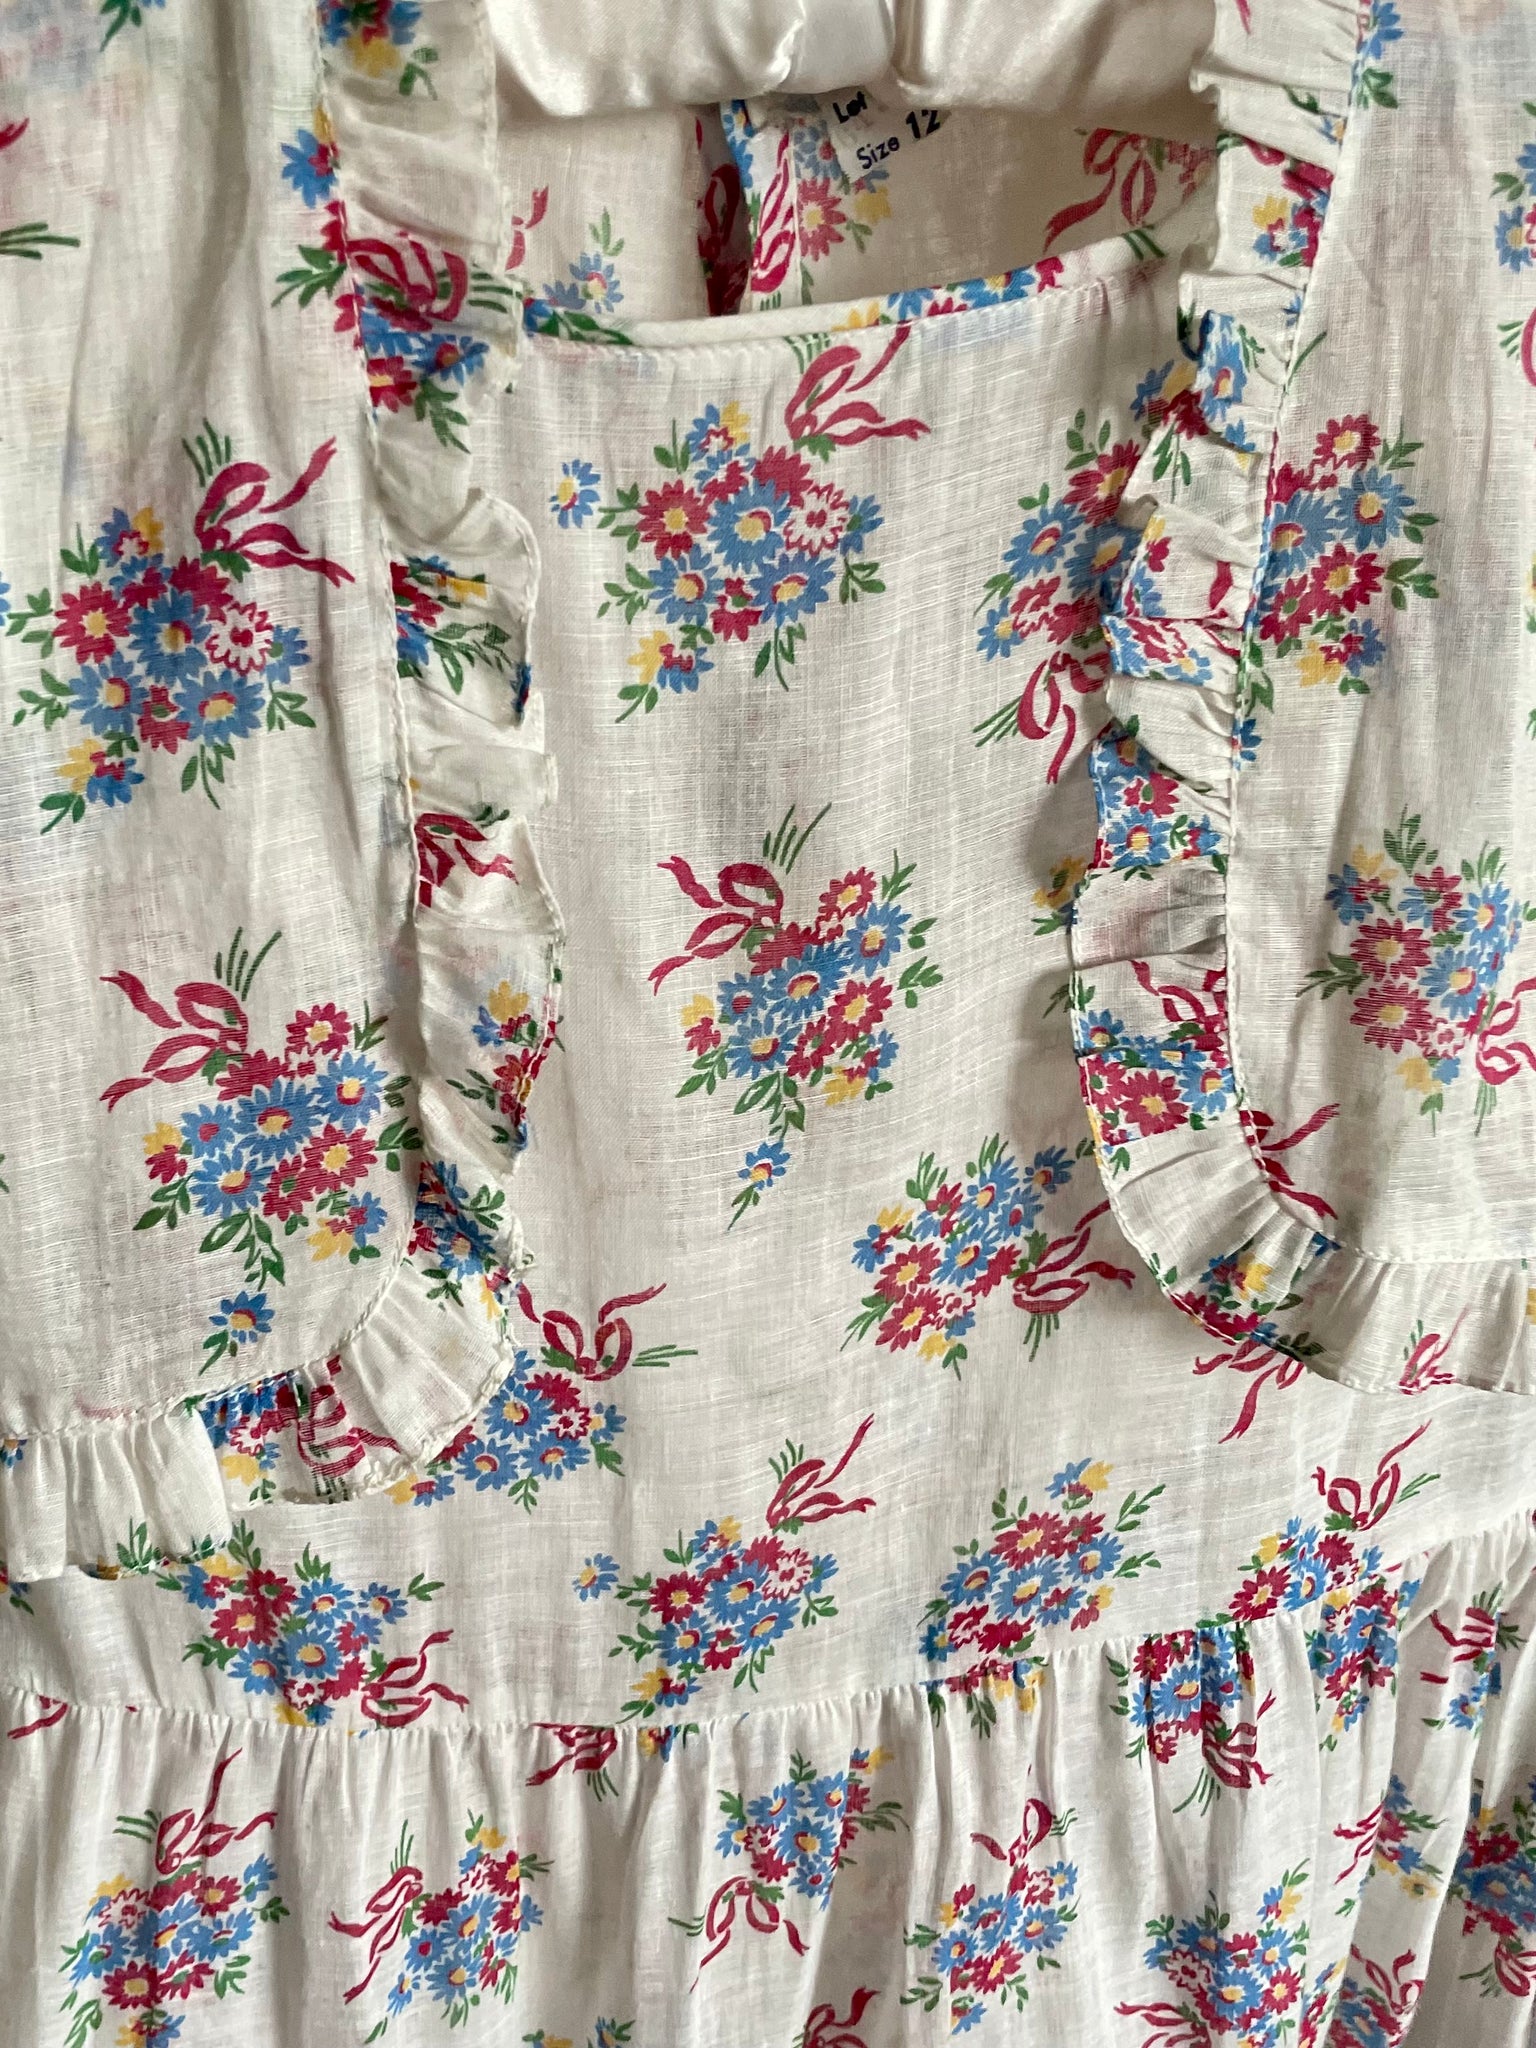 1930s White Cotton Floral Bouquet Printed Dress Puff Sleeve